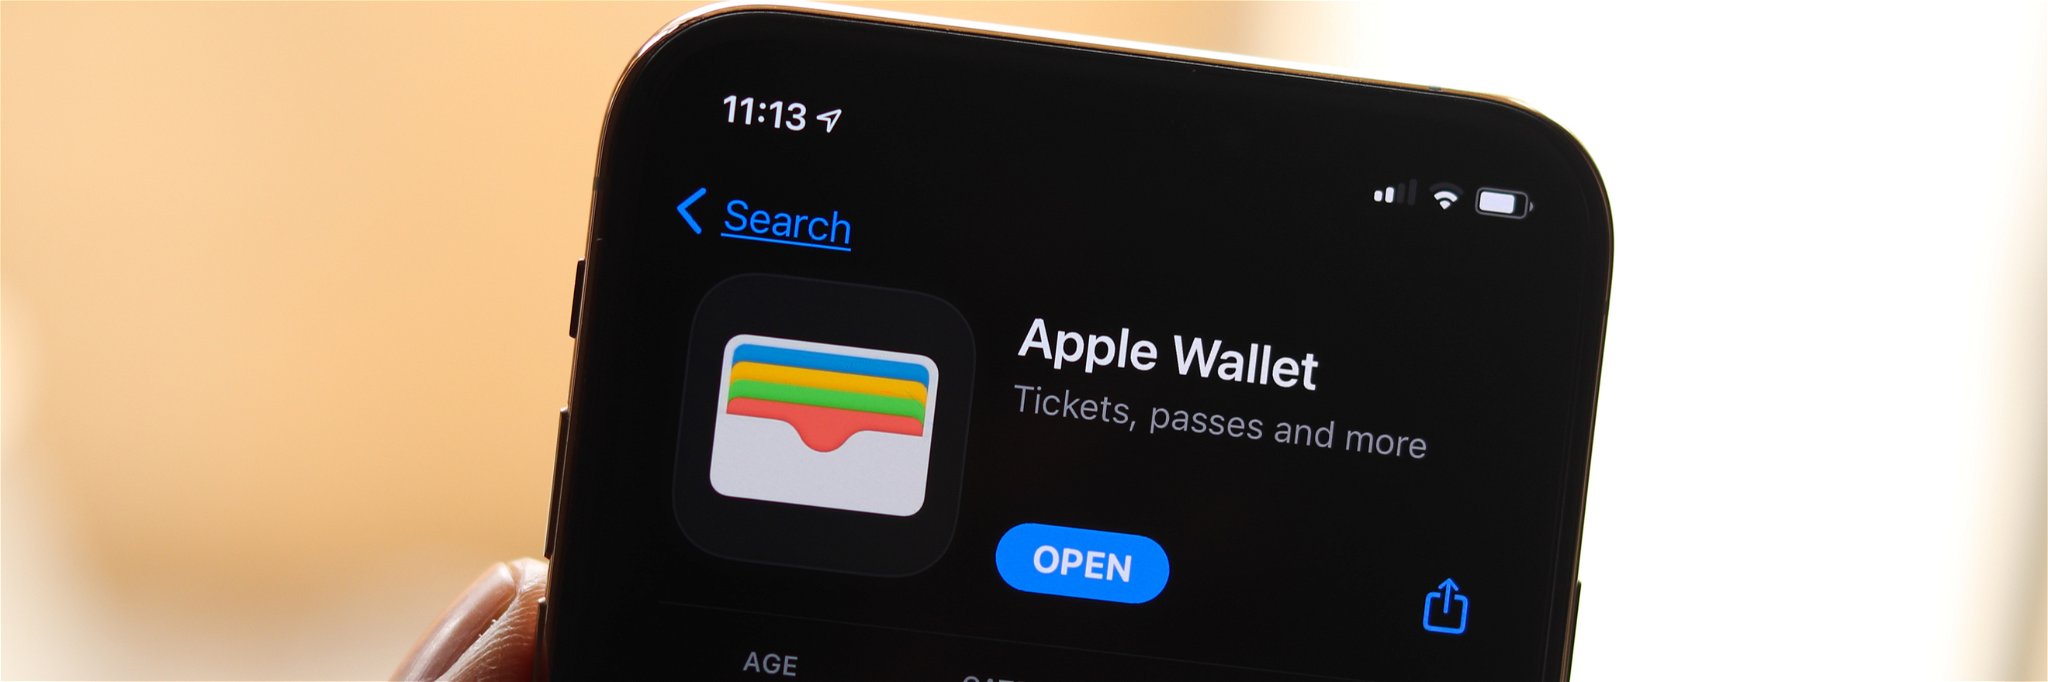 Hyatt is the first hotel brand to offer guests a digital key through Apple Wallet.